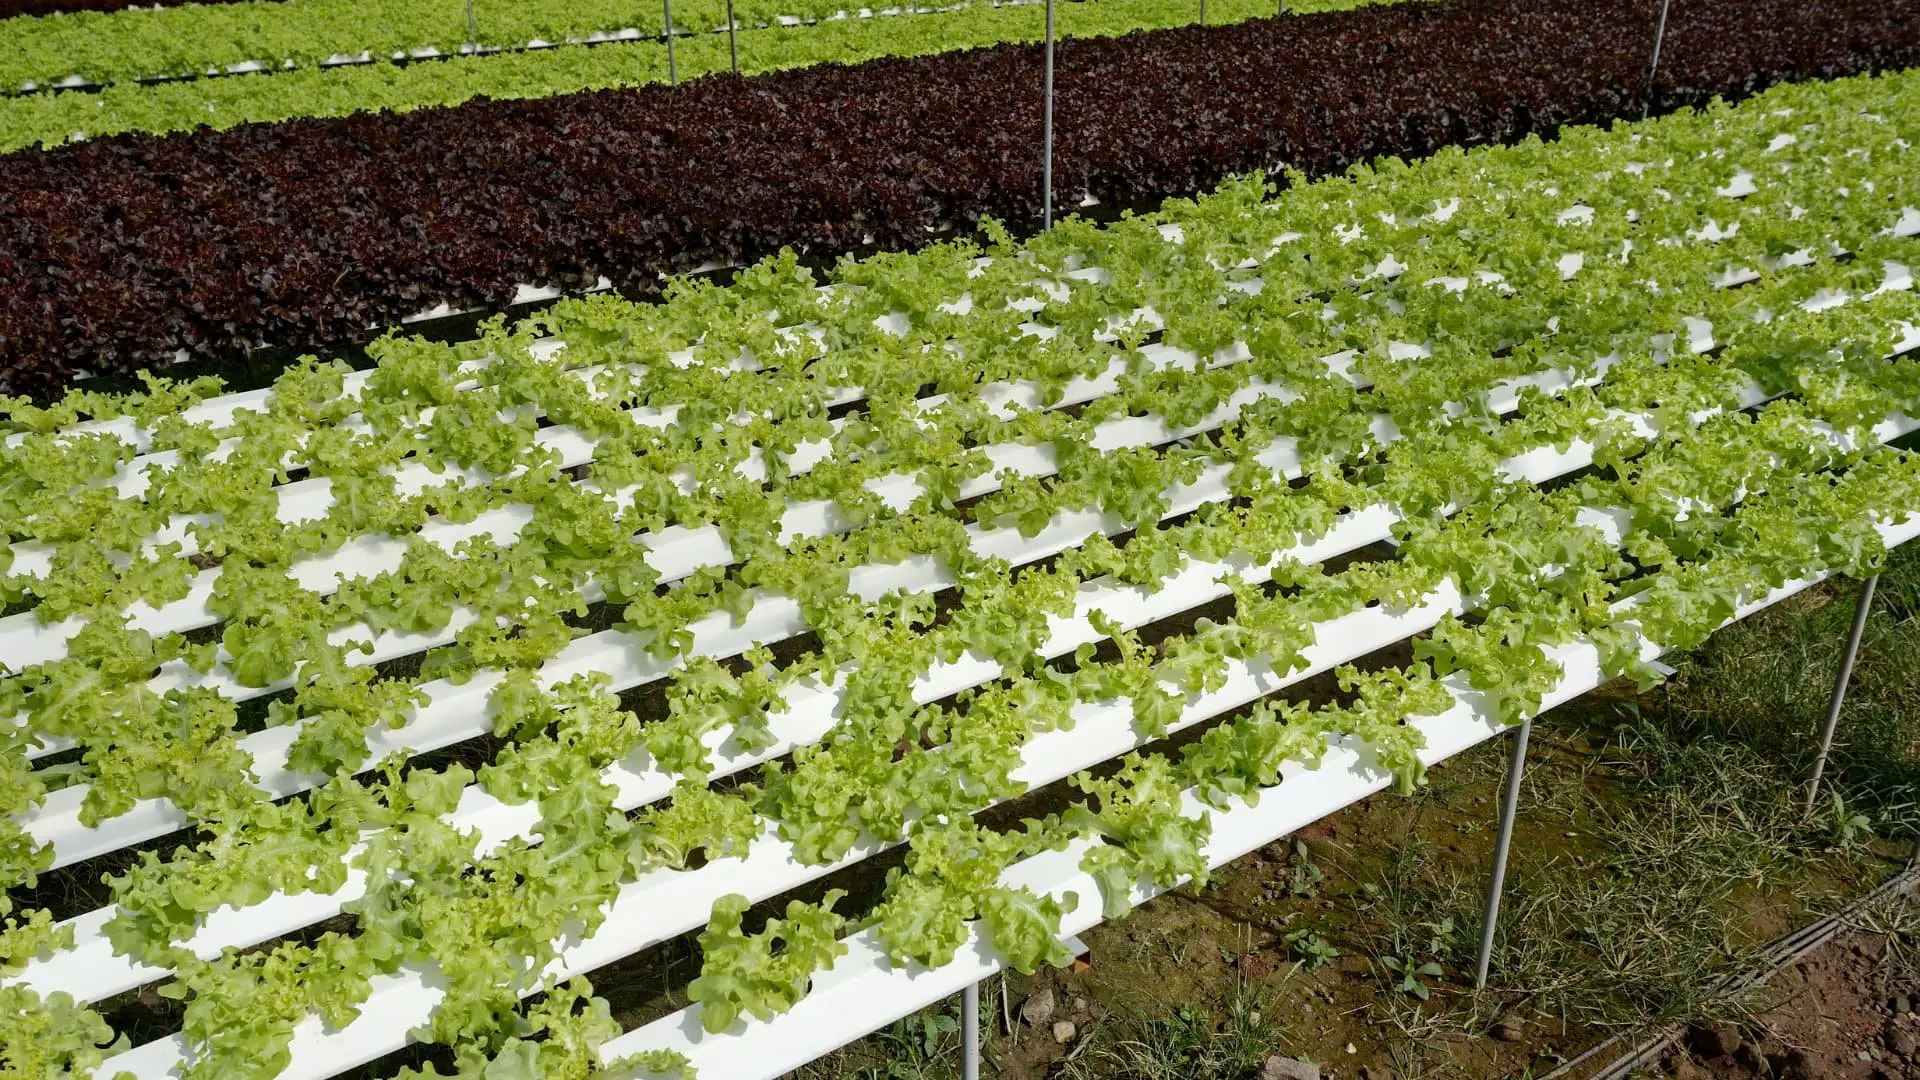 % The Nutrient Film Technique Hydroponic system is a type of Hydroponic system. This system is very efficient, as it utilizes a minimal amount of water and nutrients.